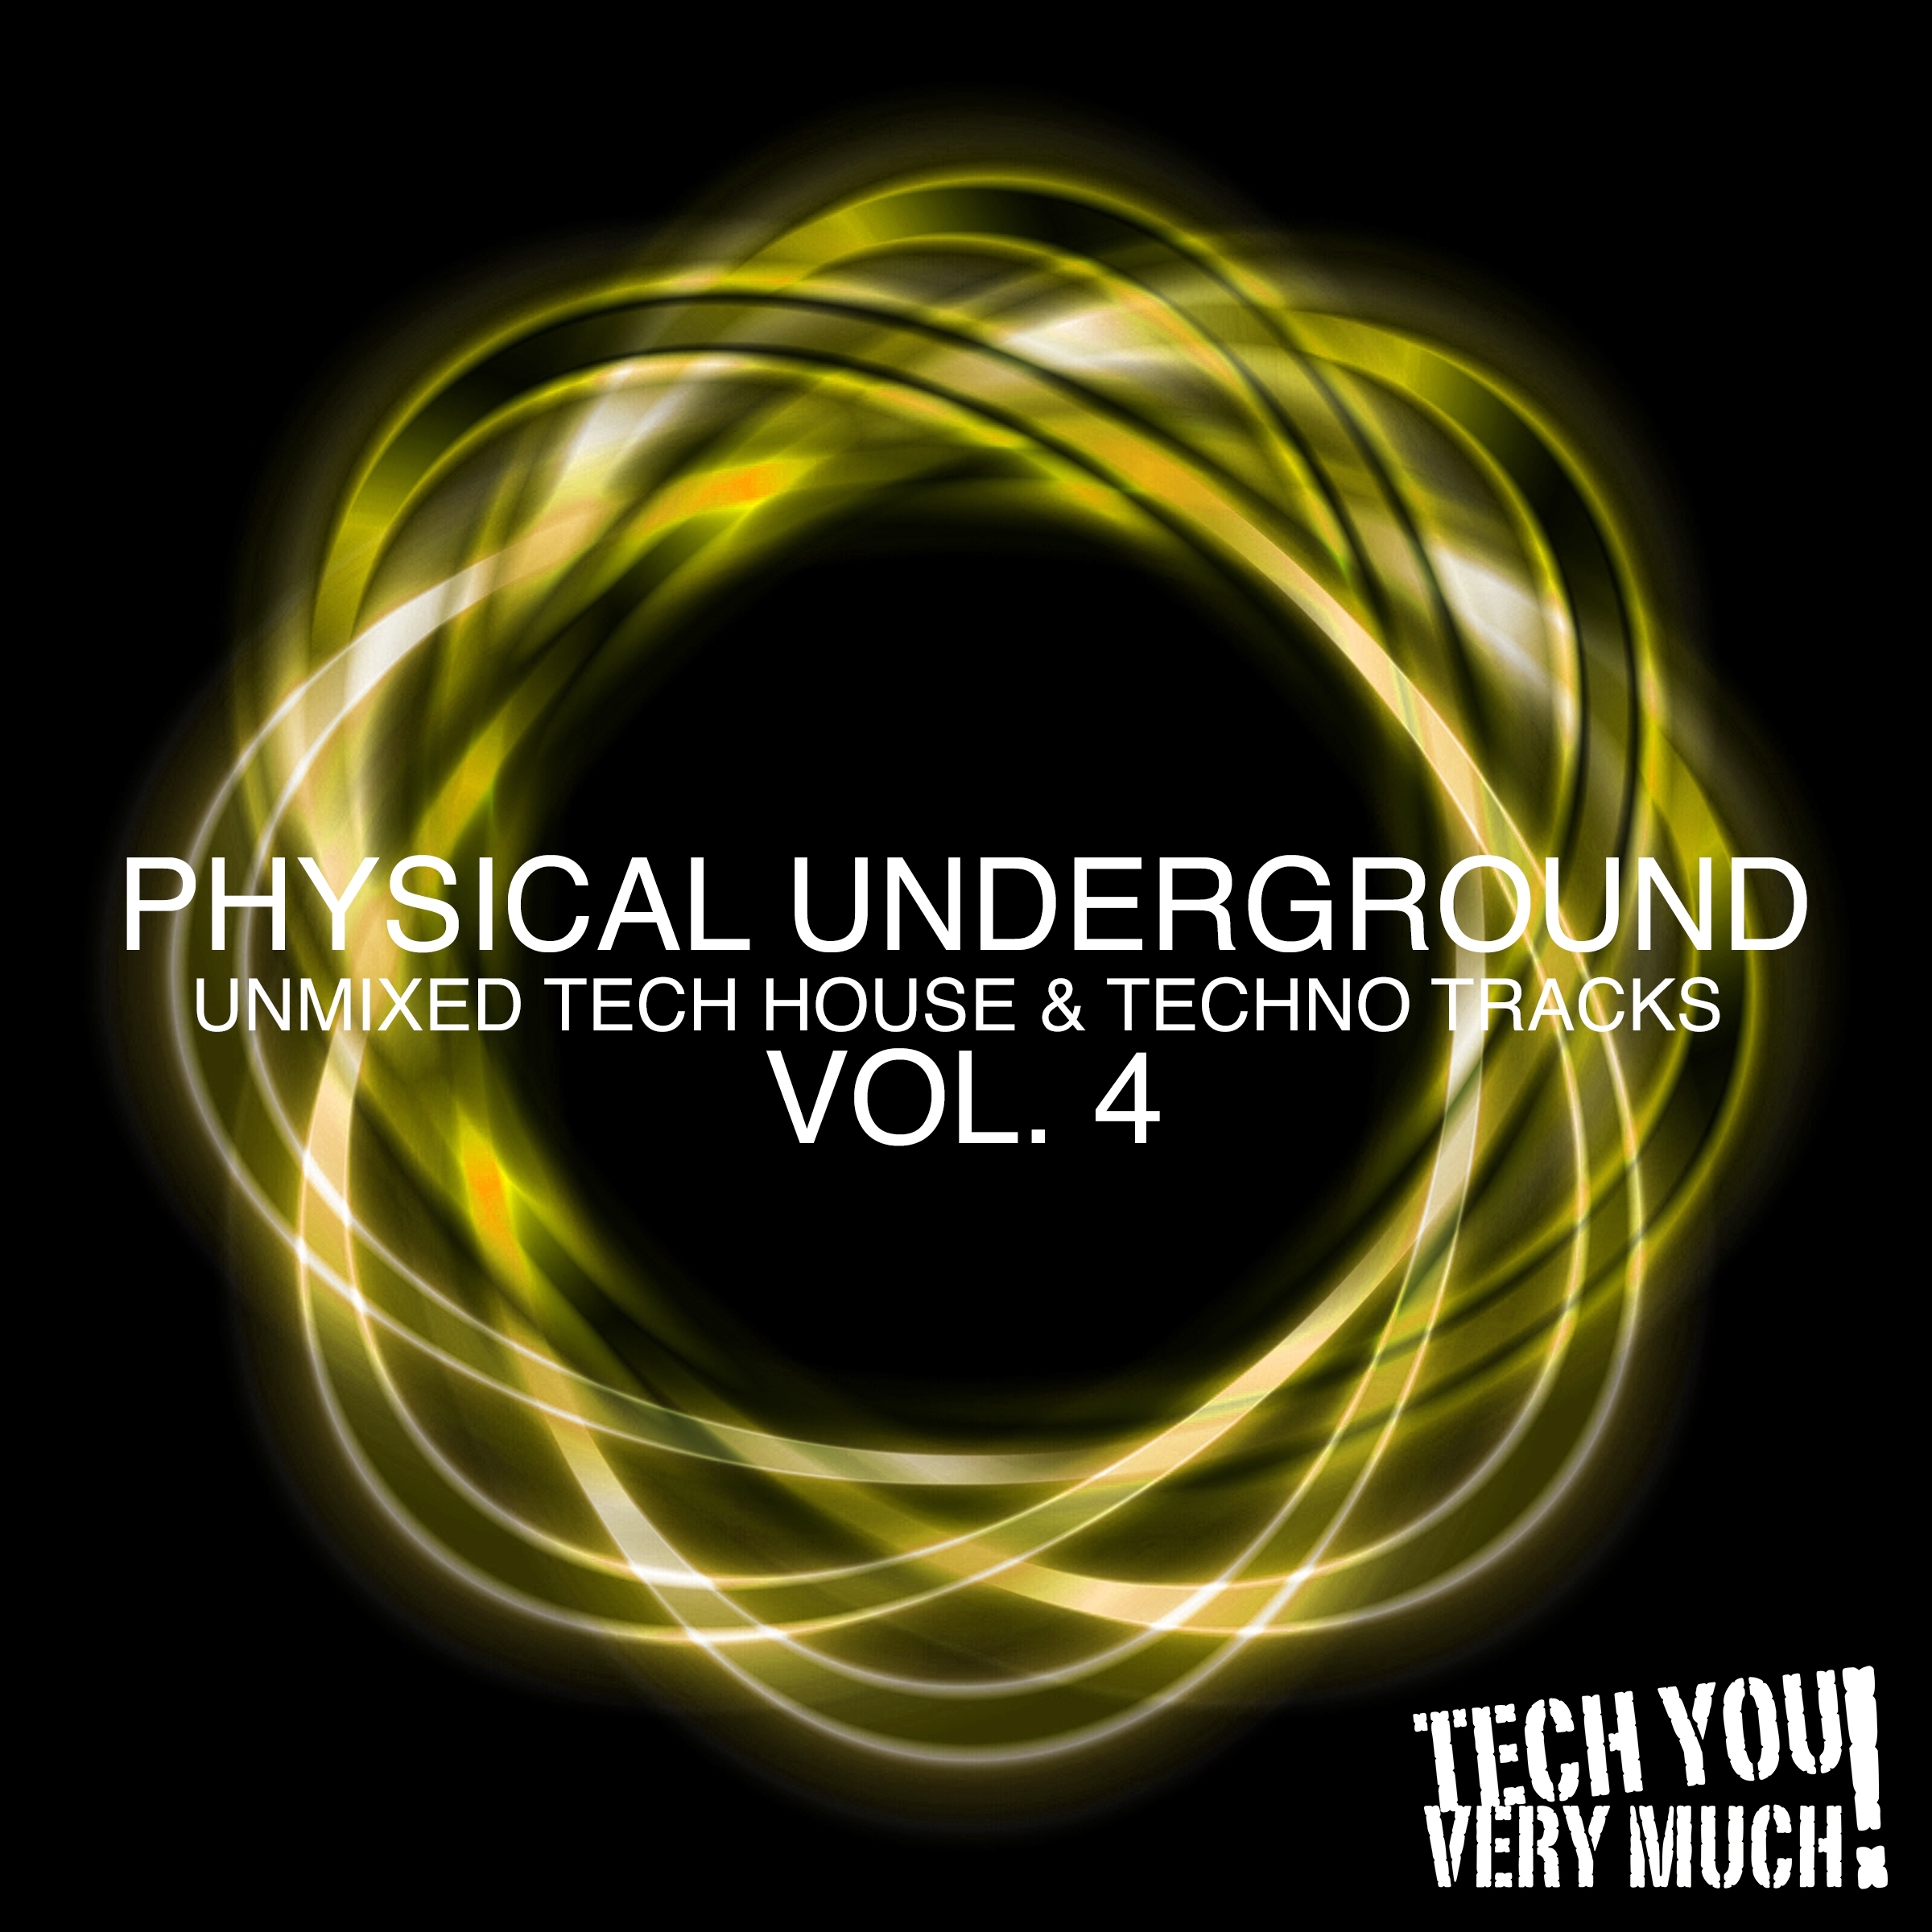 Physical Underground, Vol. 4 (Unmixed Tech House & Techno Tracks)